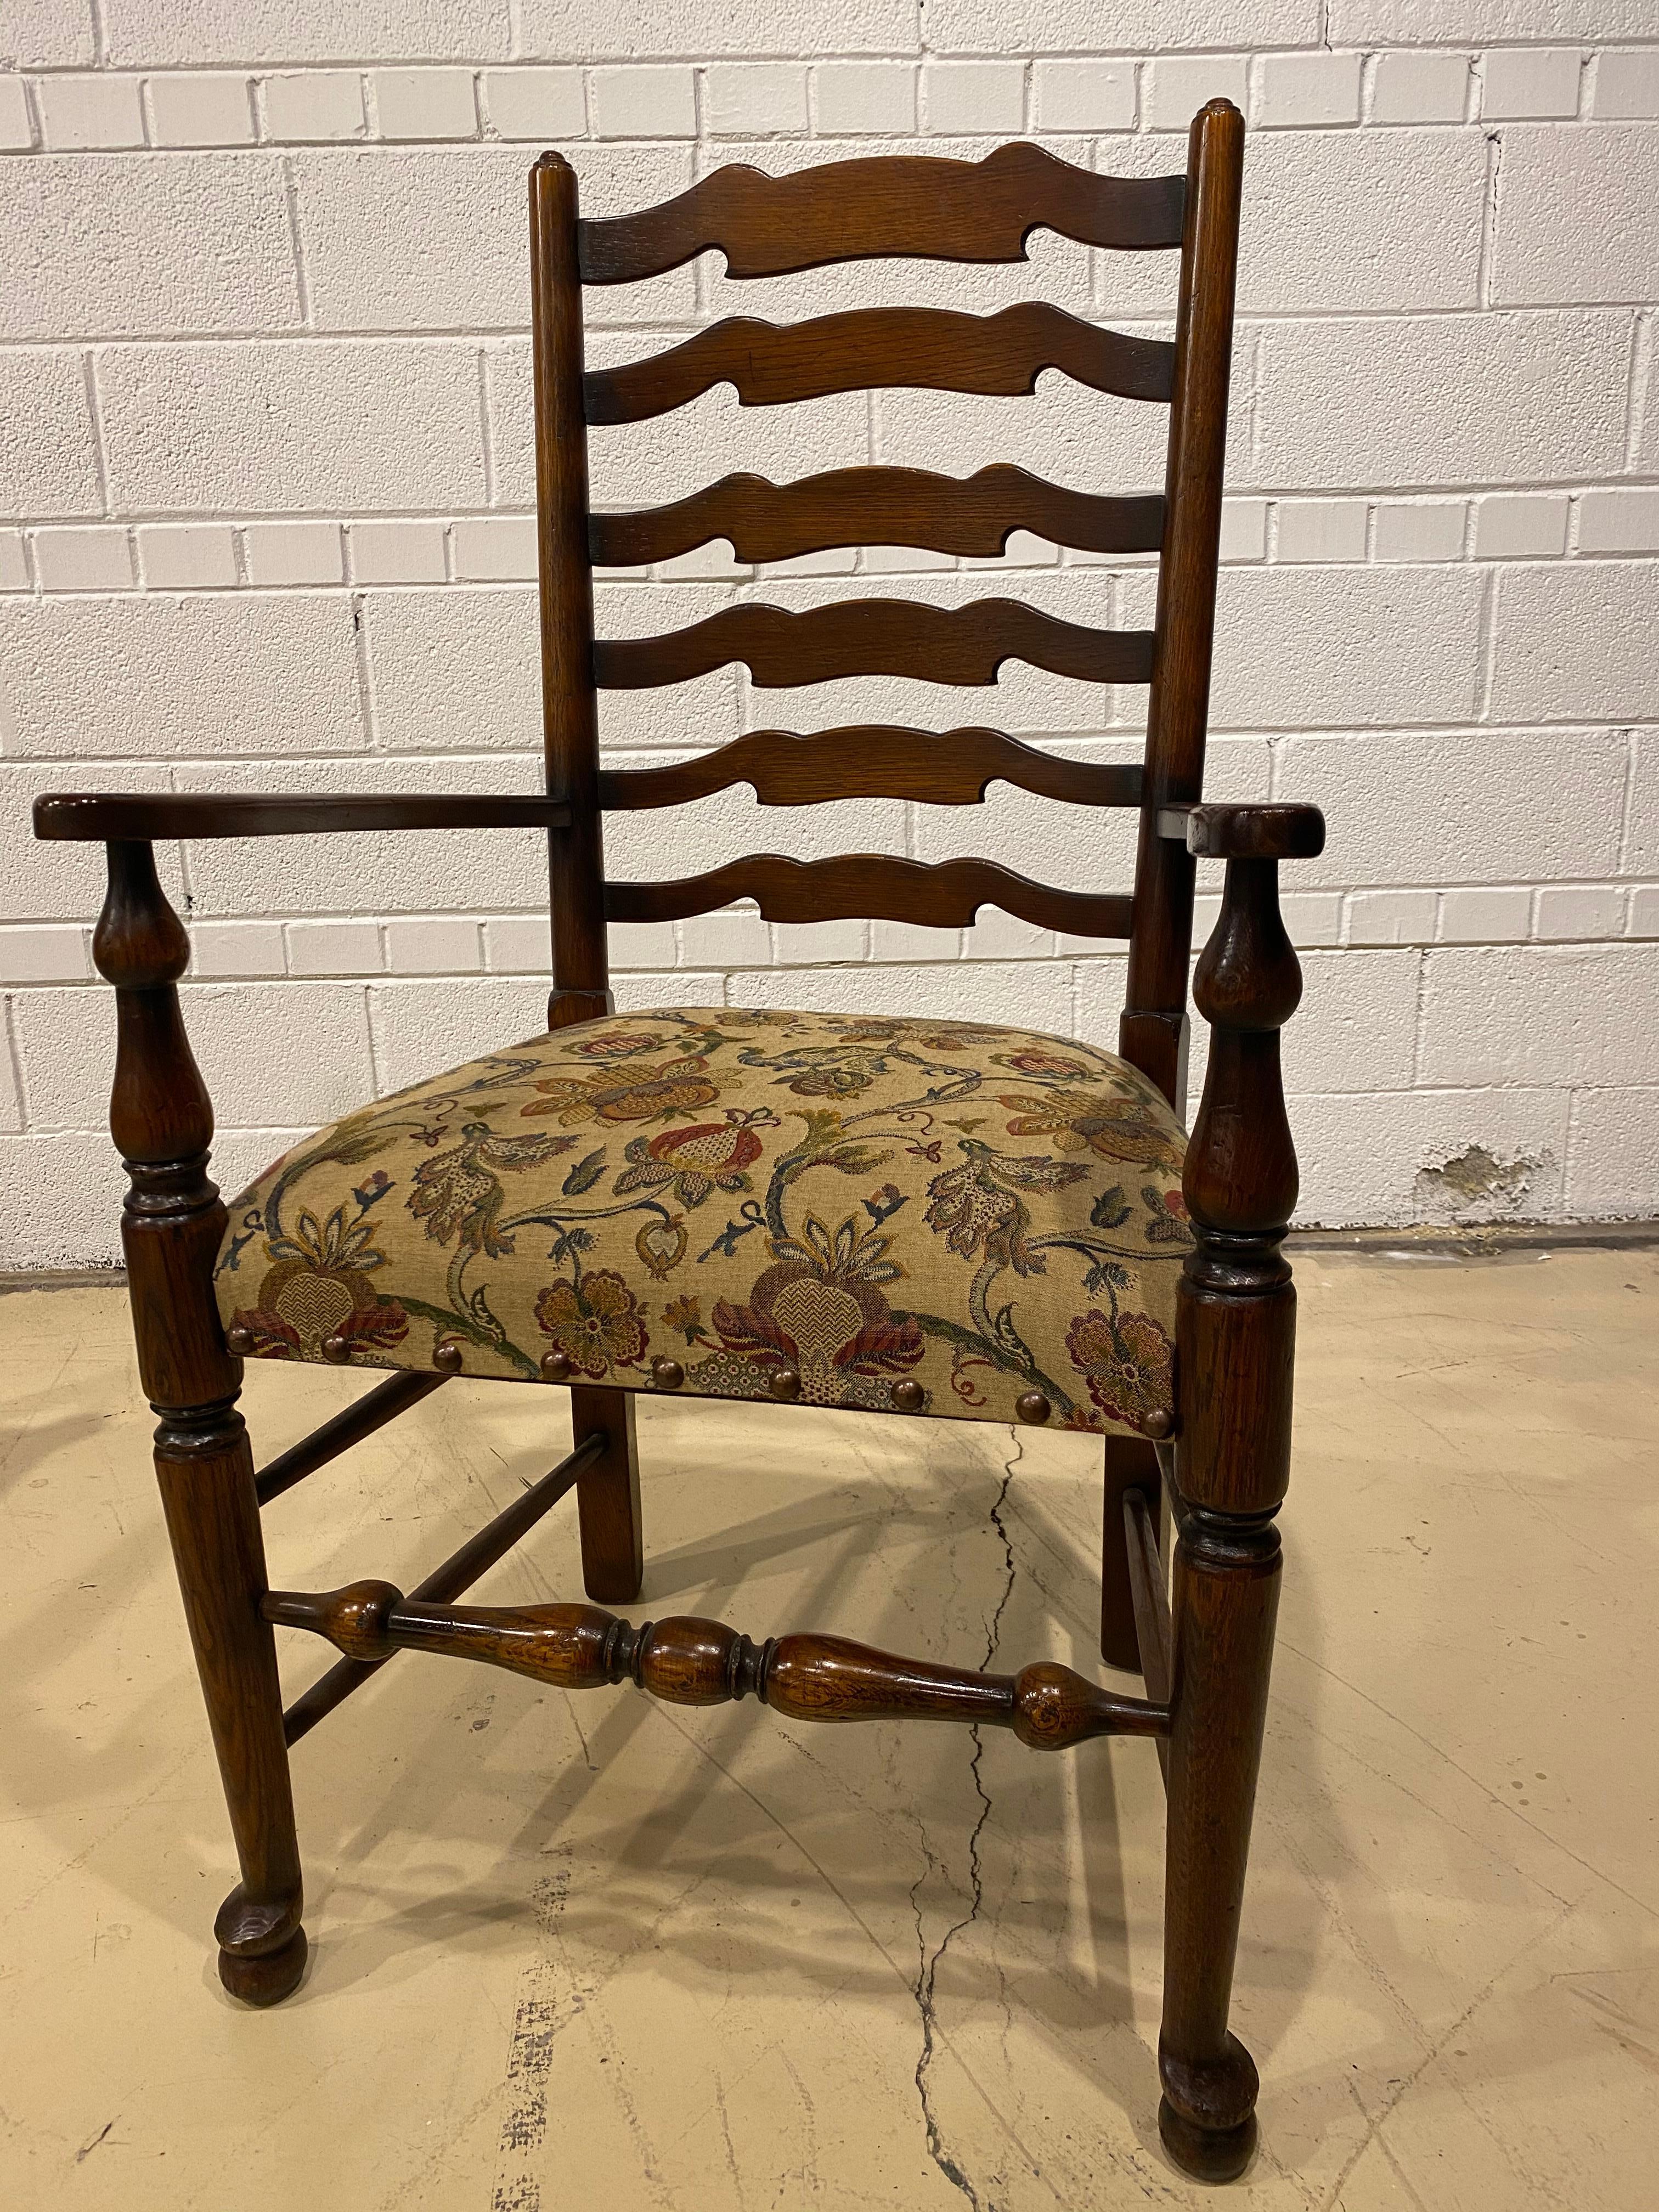 A solid set of 8 oak chairs English made by Bevan Funnel, in England, fully upholstered seats with mild wear to the fabric. The set consists of 2 armchairs and 6 without arms.
There is a carved rosette on the left back leg of each of the